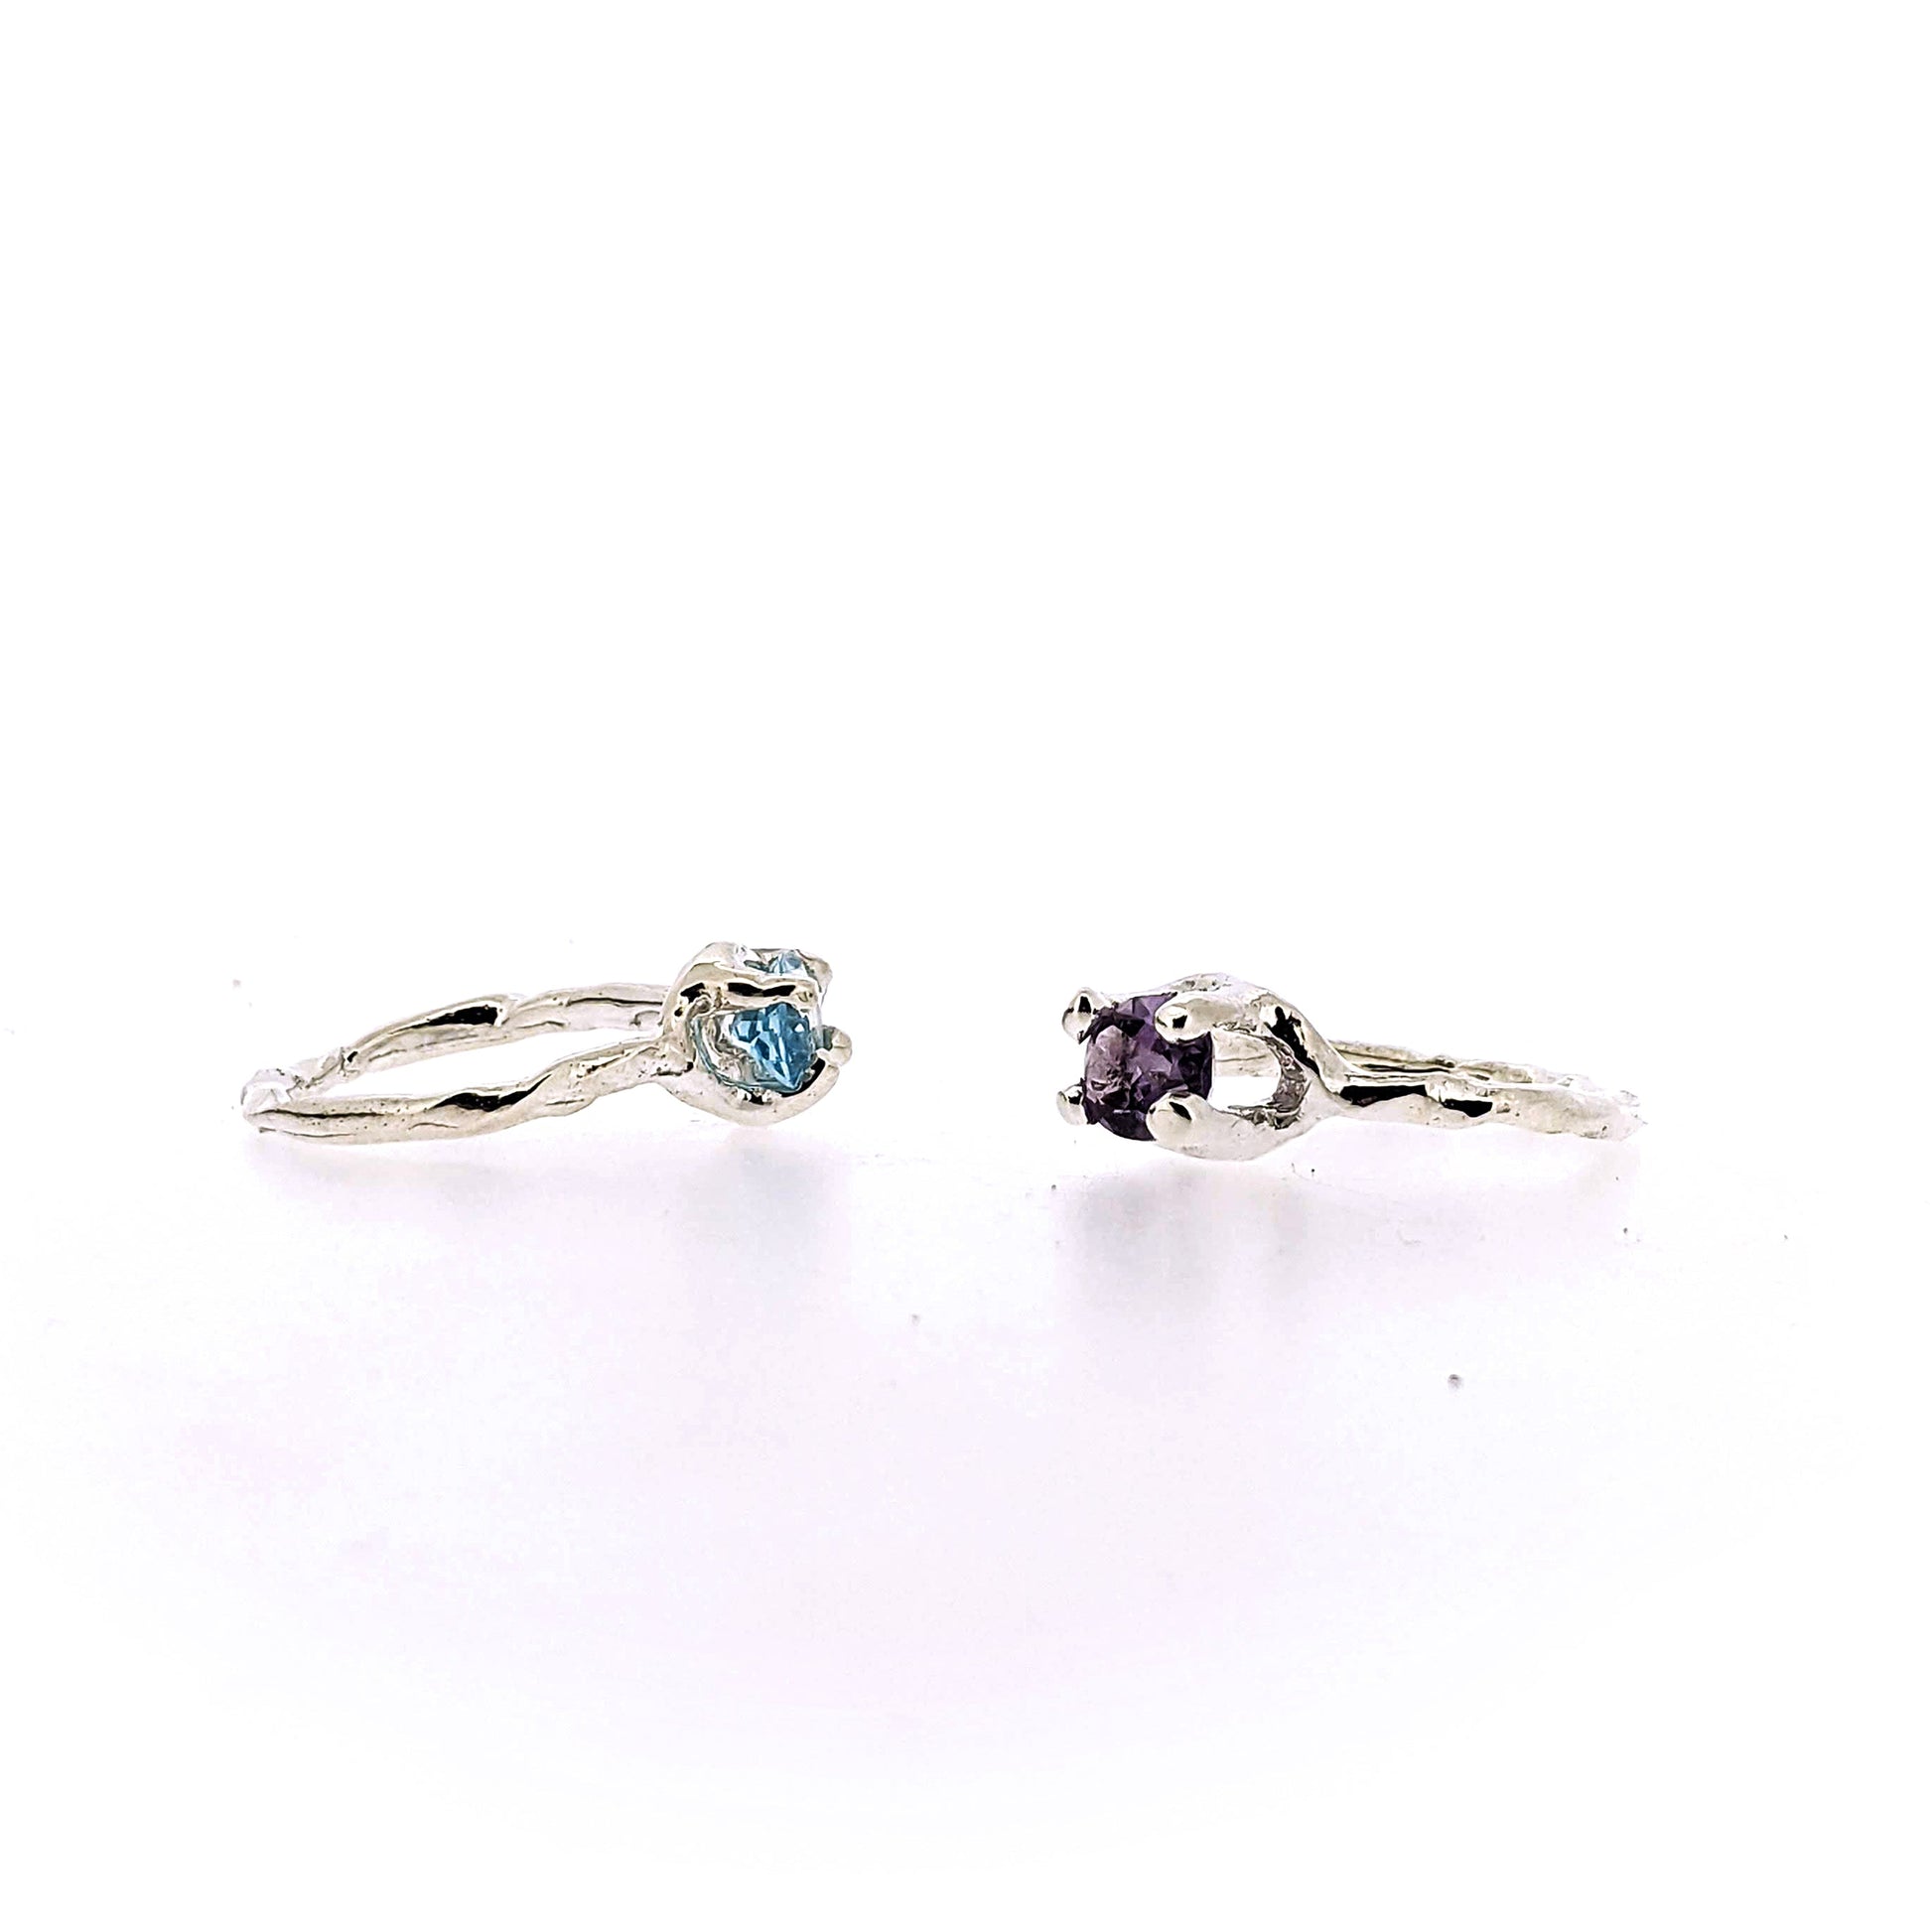 Side views of blue topaz and amethyst Ada Rings sitting next to one another.